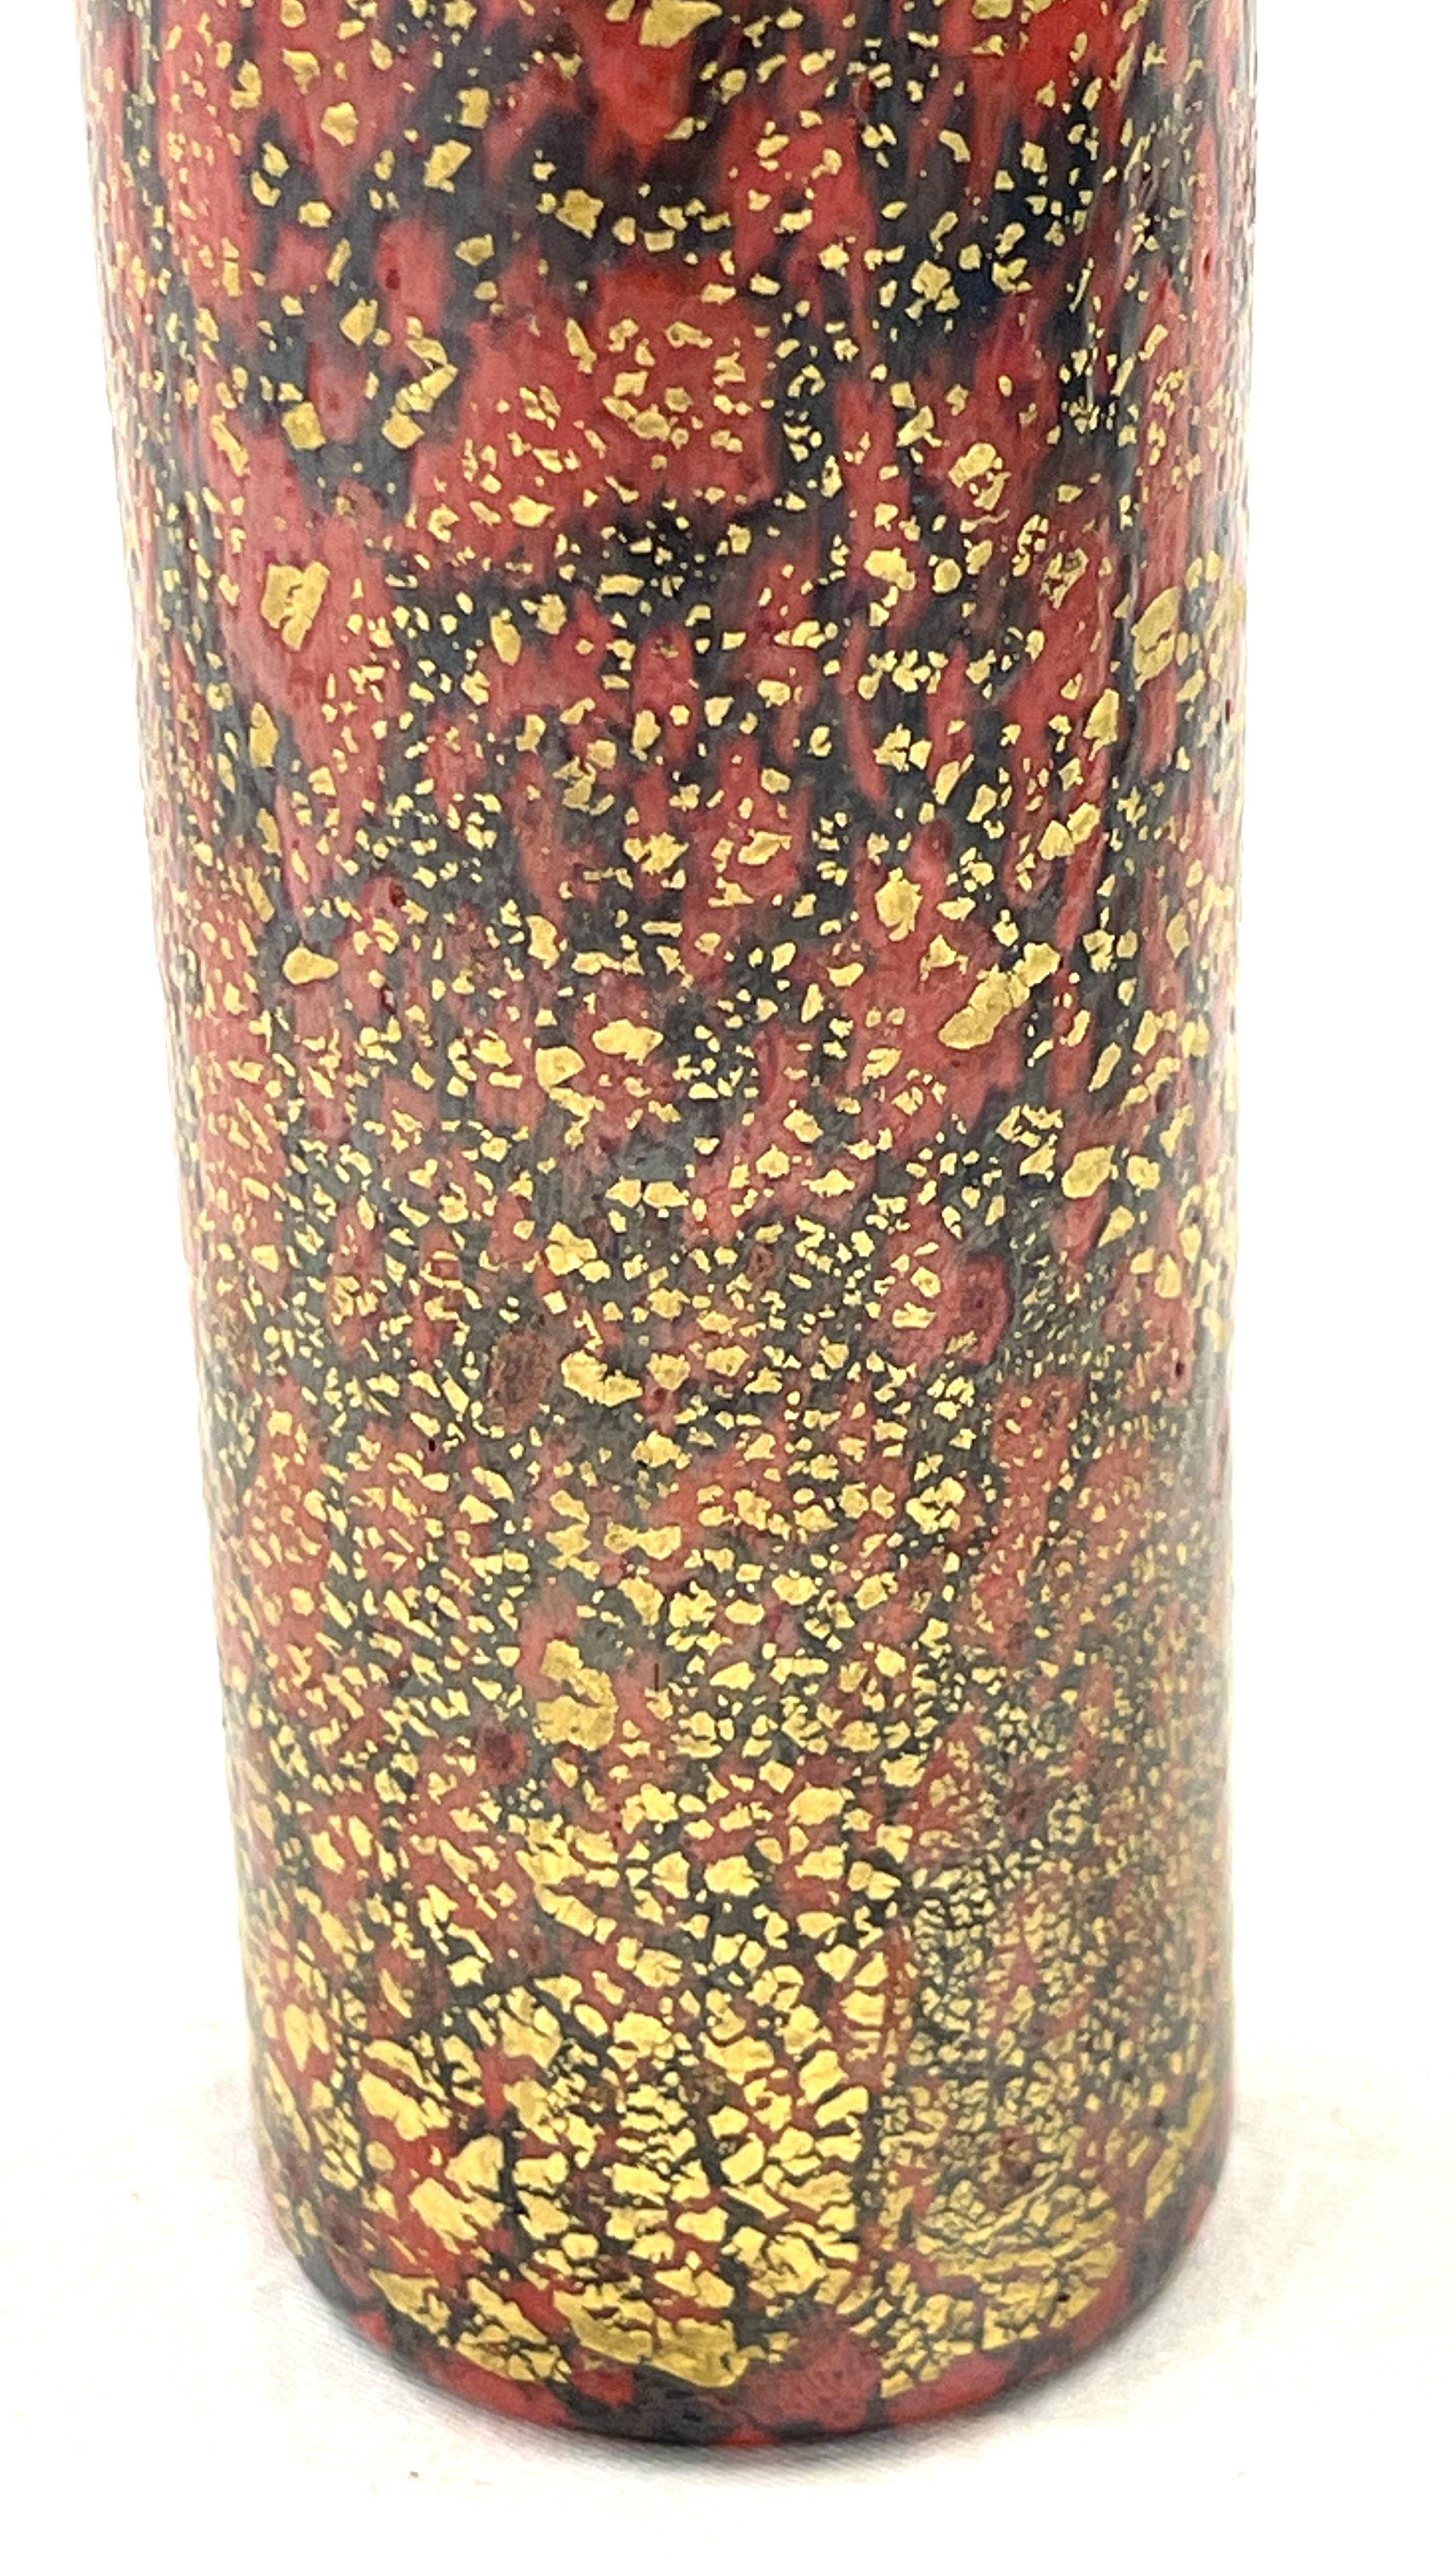 A very rare Isle of Wight Studio Glass 'Firecracker' cylinder vase, designed by Timothy Harris in - Image 7 of 7